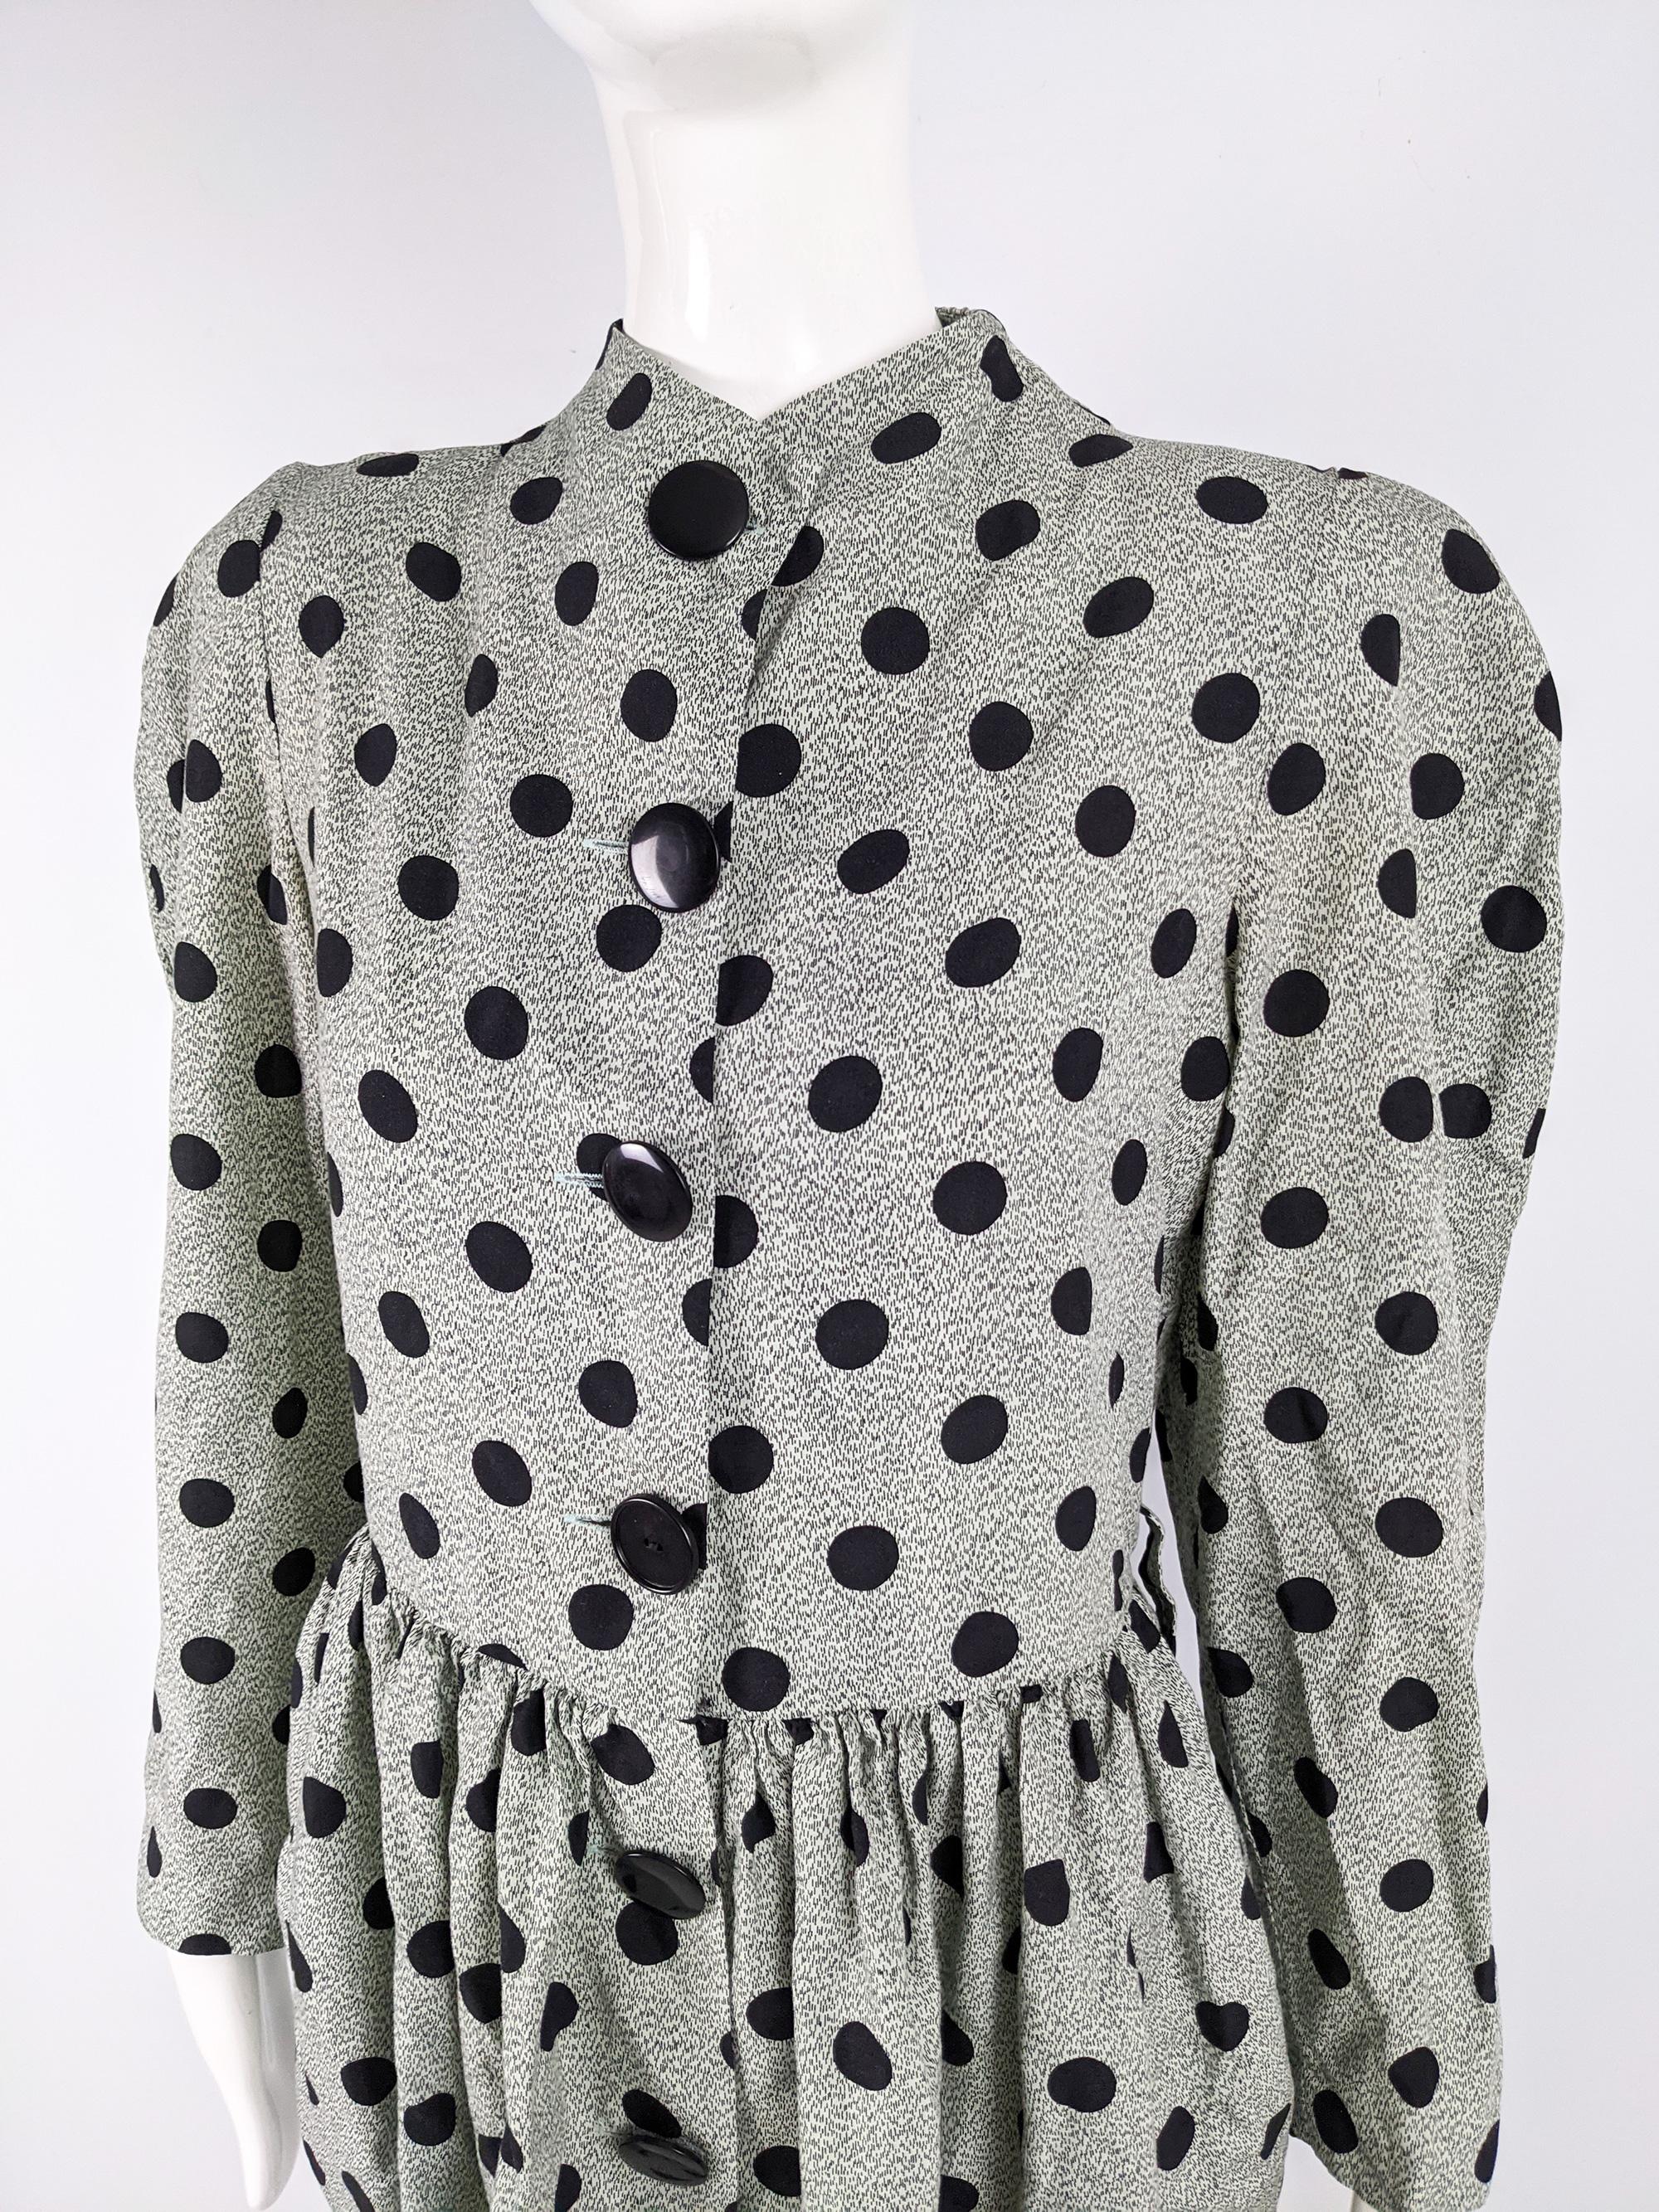 Gray Williwear by Willi Smith Vintage Documented Polka Dot Dress, 1984 For Sale